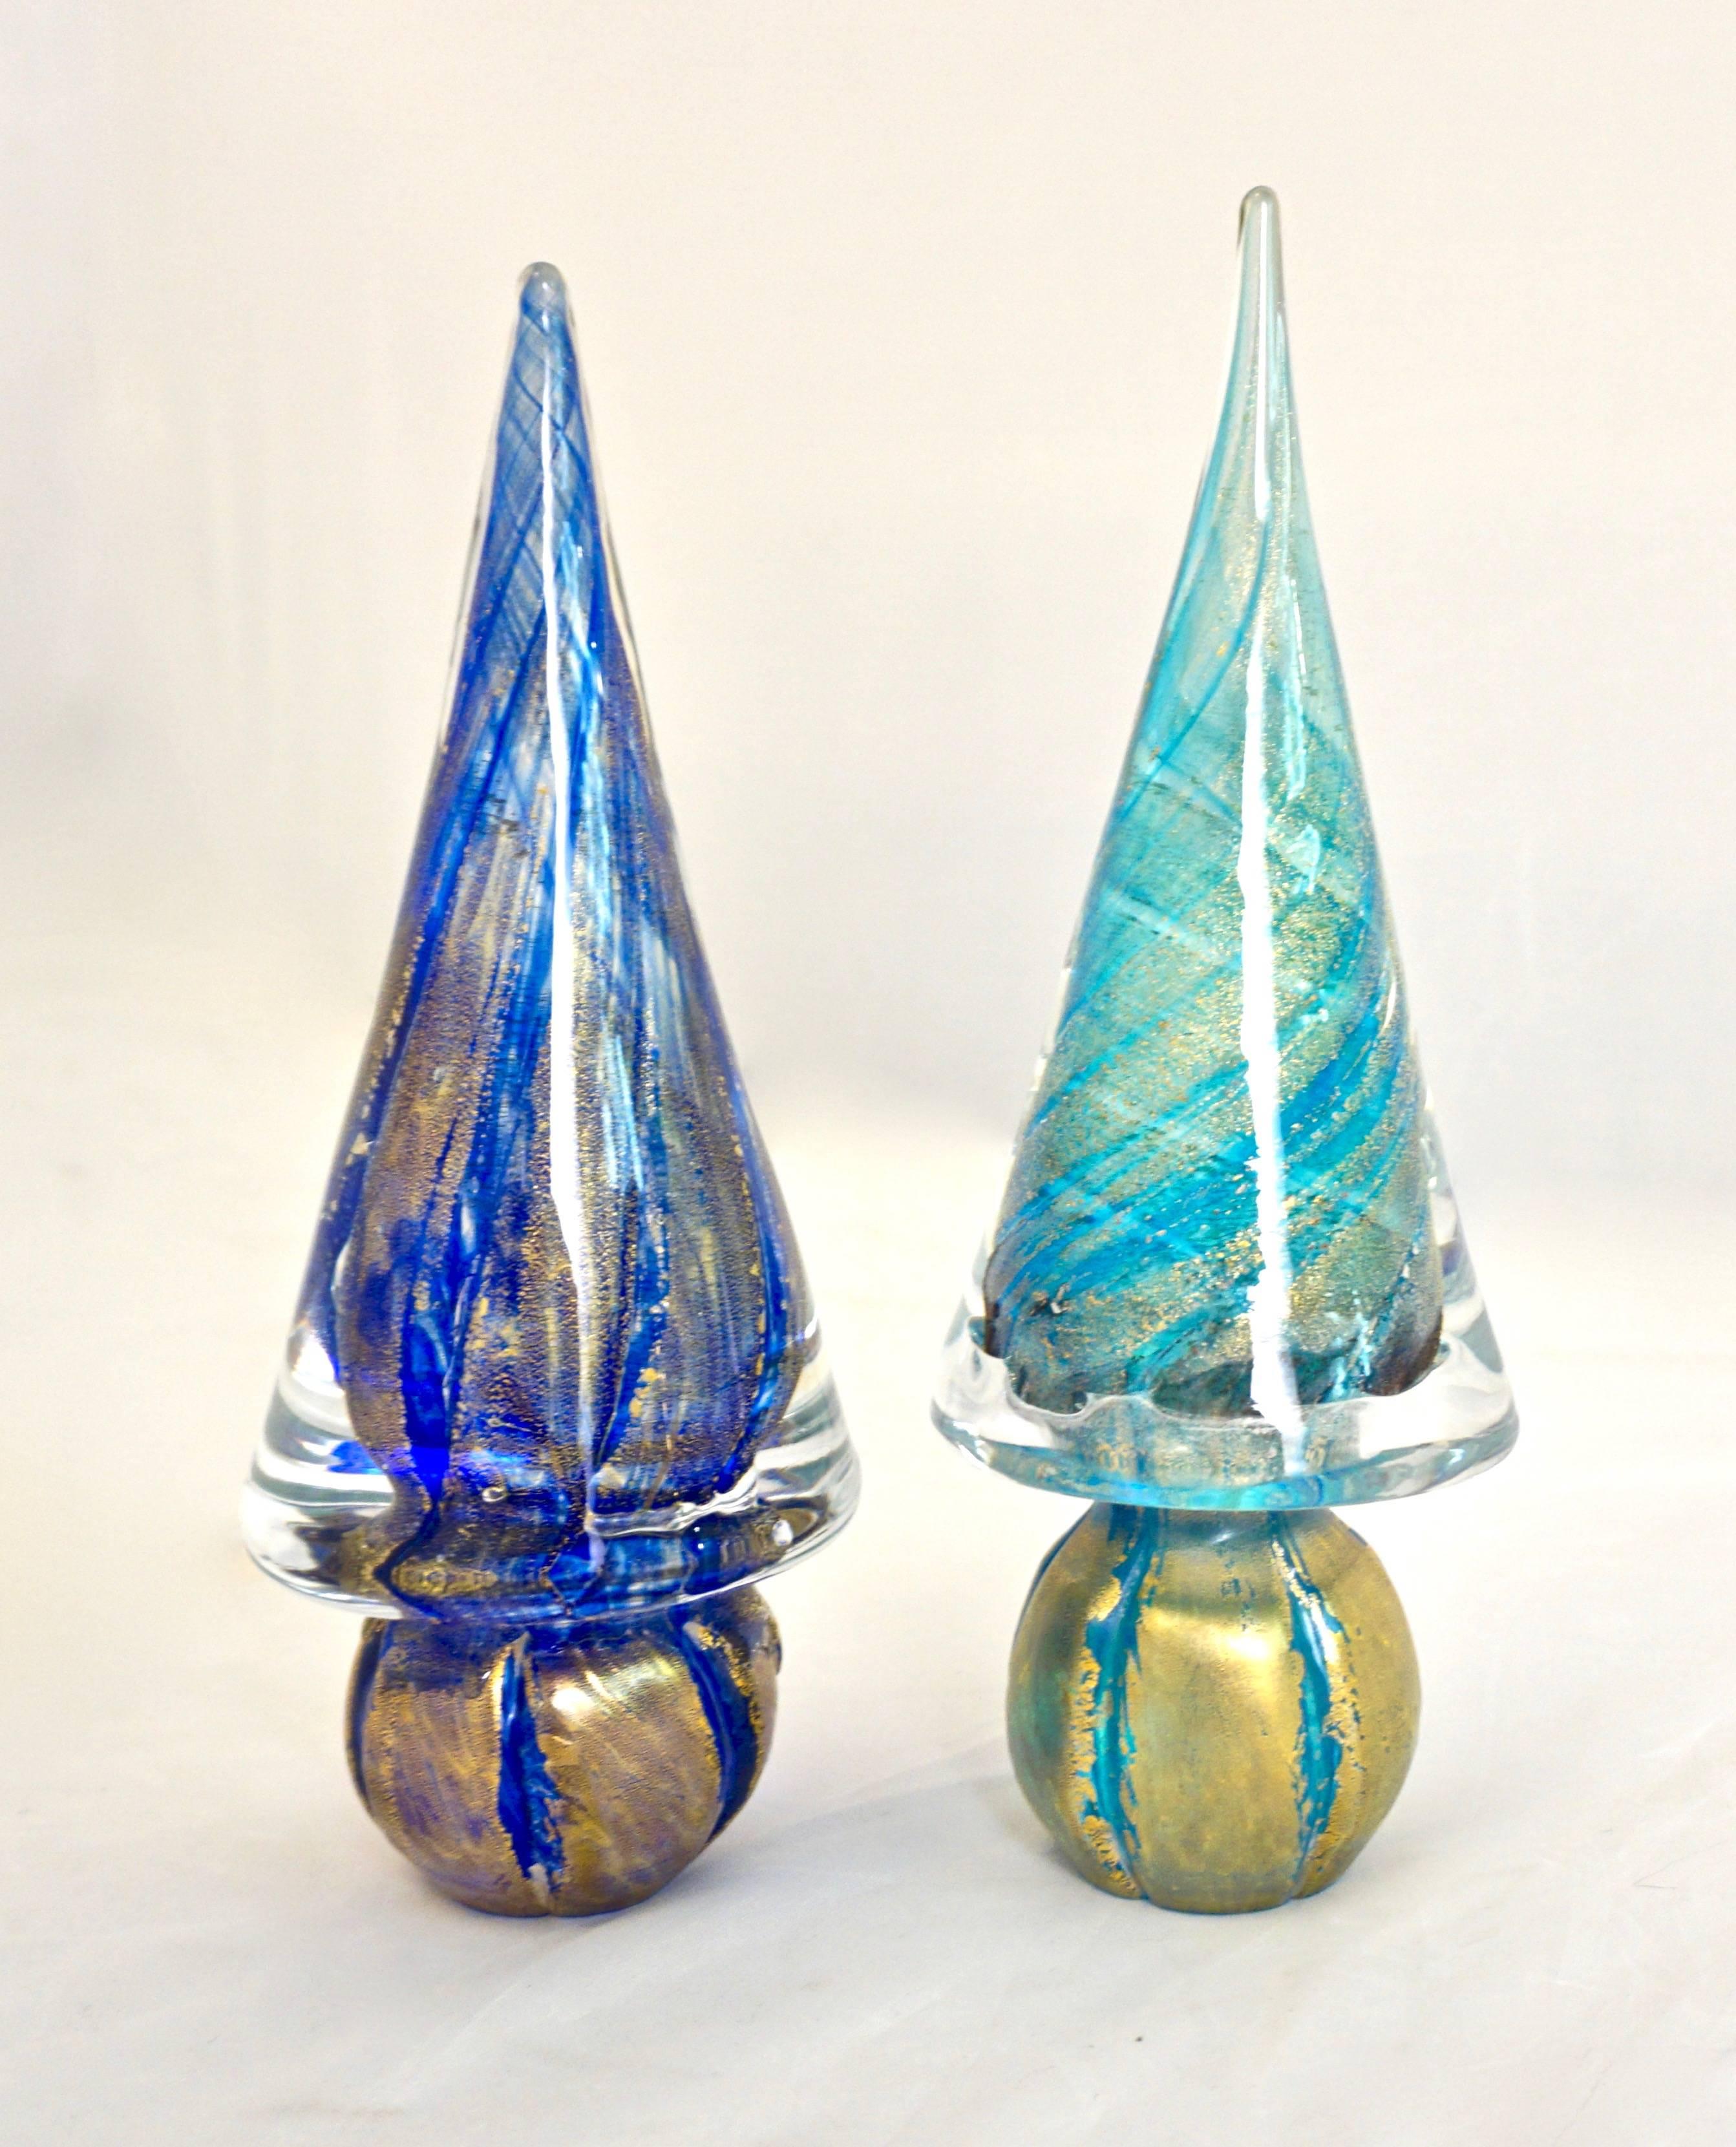 Hand-Crafted Formia 1980s Italian Vintage Colorful Murano Glass Christmas Tree Sculptures